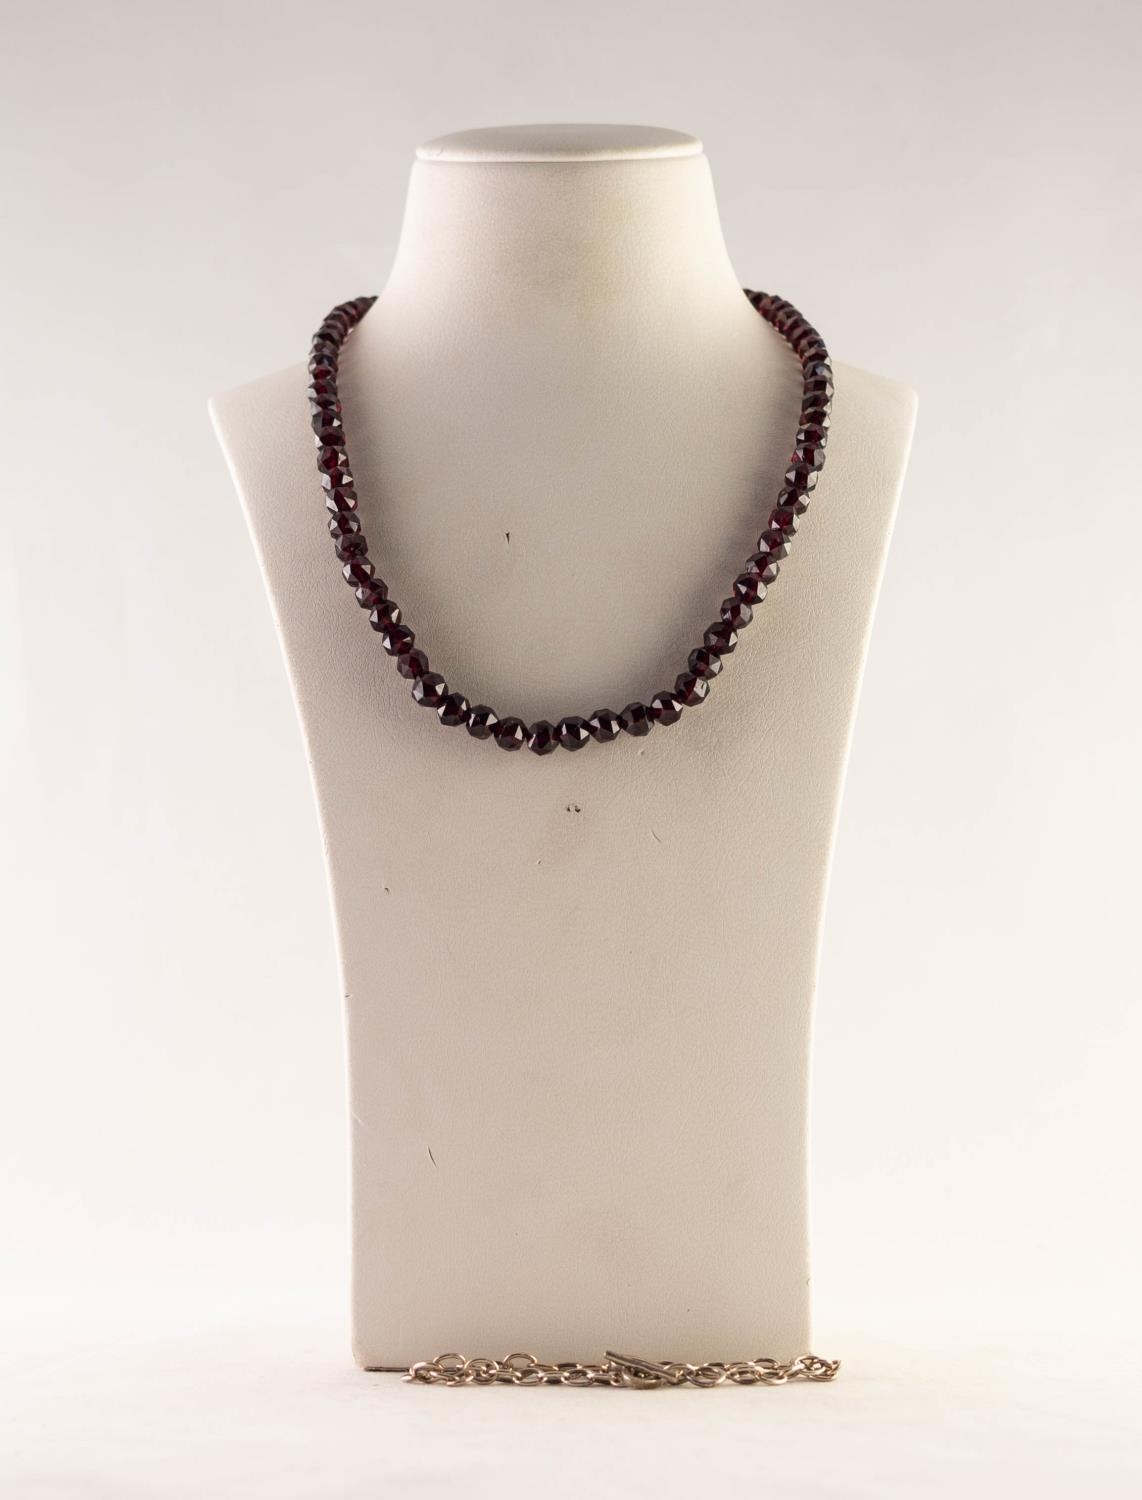 A FACET CUT GARNET BEAD NECKLACE, of approx 71 beads, 18" (46cm) long and a 925 MARK SILVER